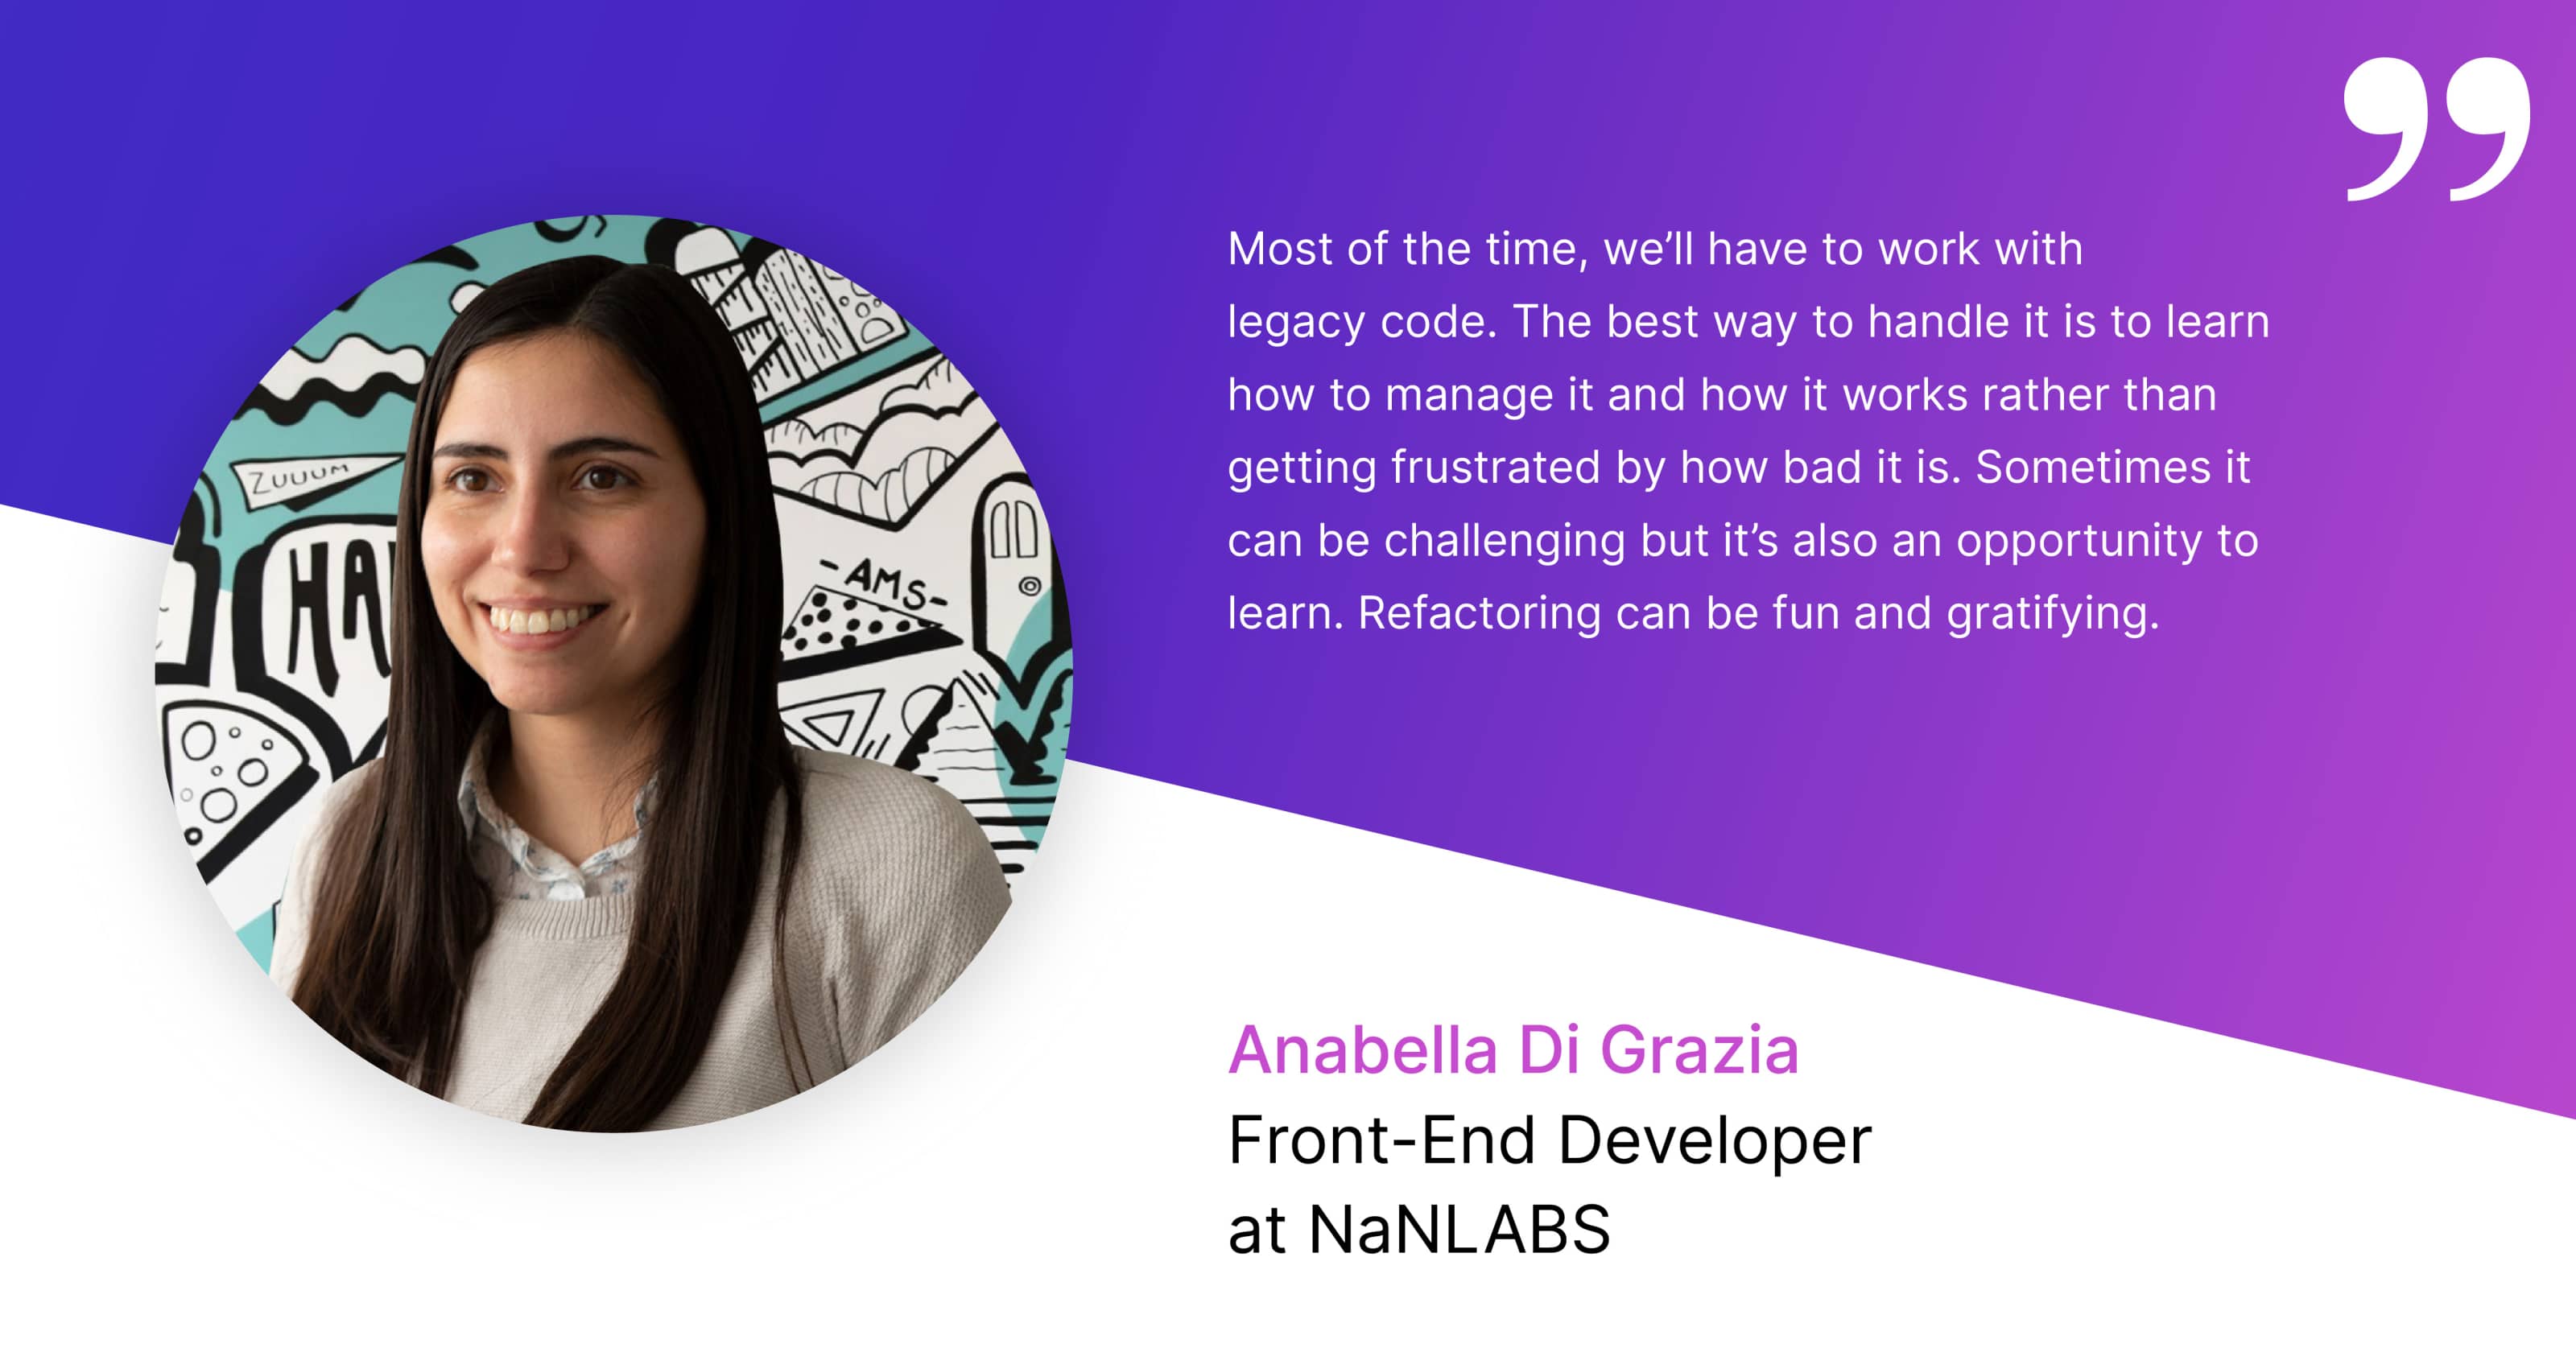 A picture of Anabella Di Grazia, Front-End Developer at NaNLABS, with a quote 